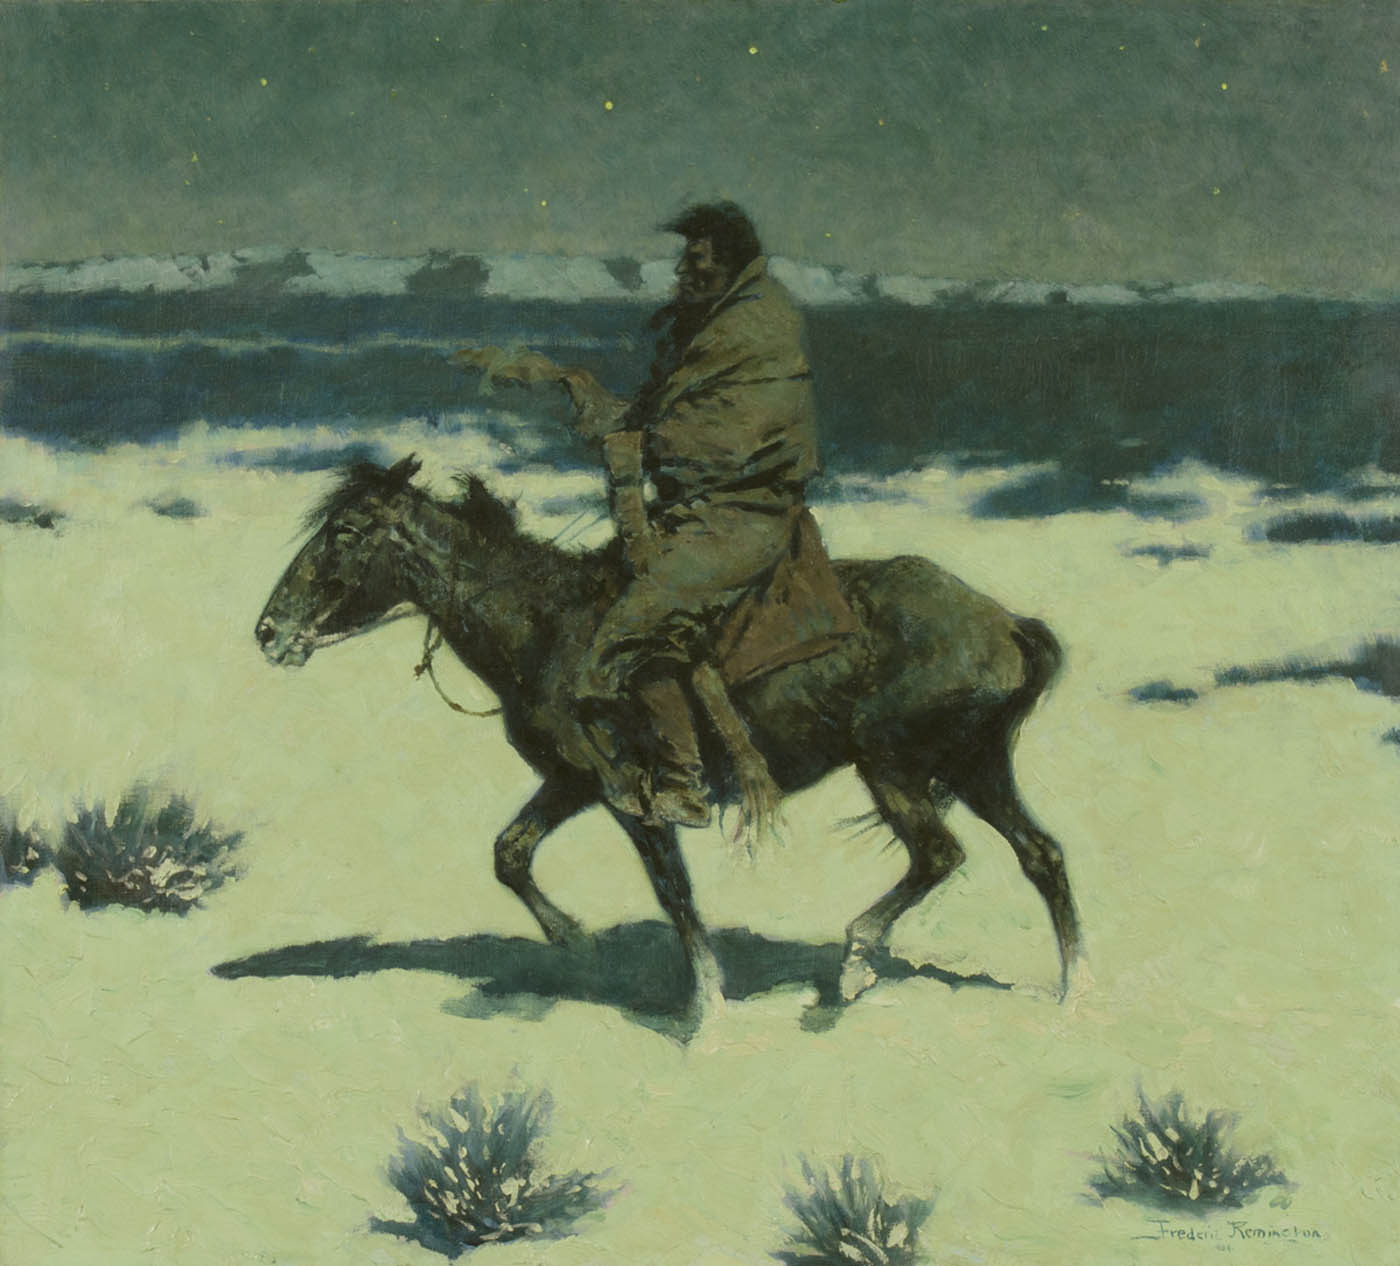 The Luckless Hunter, Frederic Remington, 1909, Oil on canvas, Sid Richardson Museum